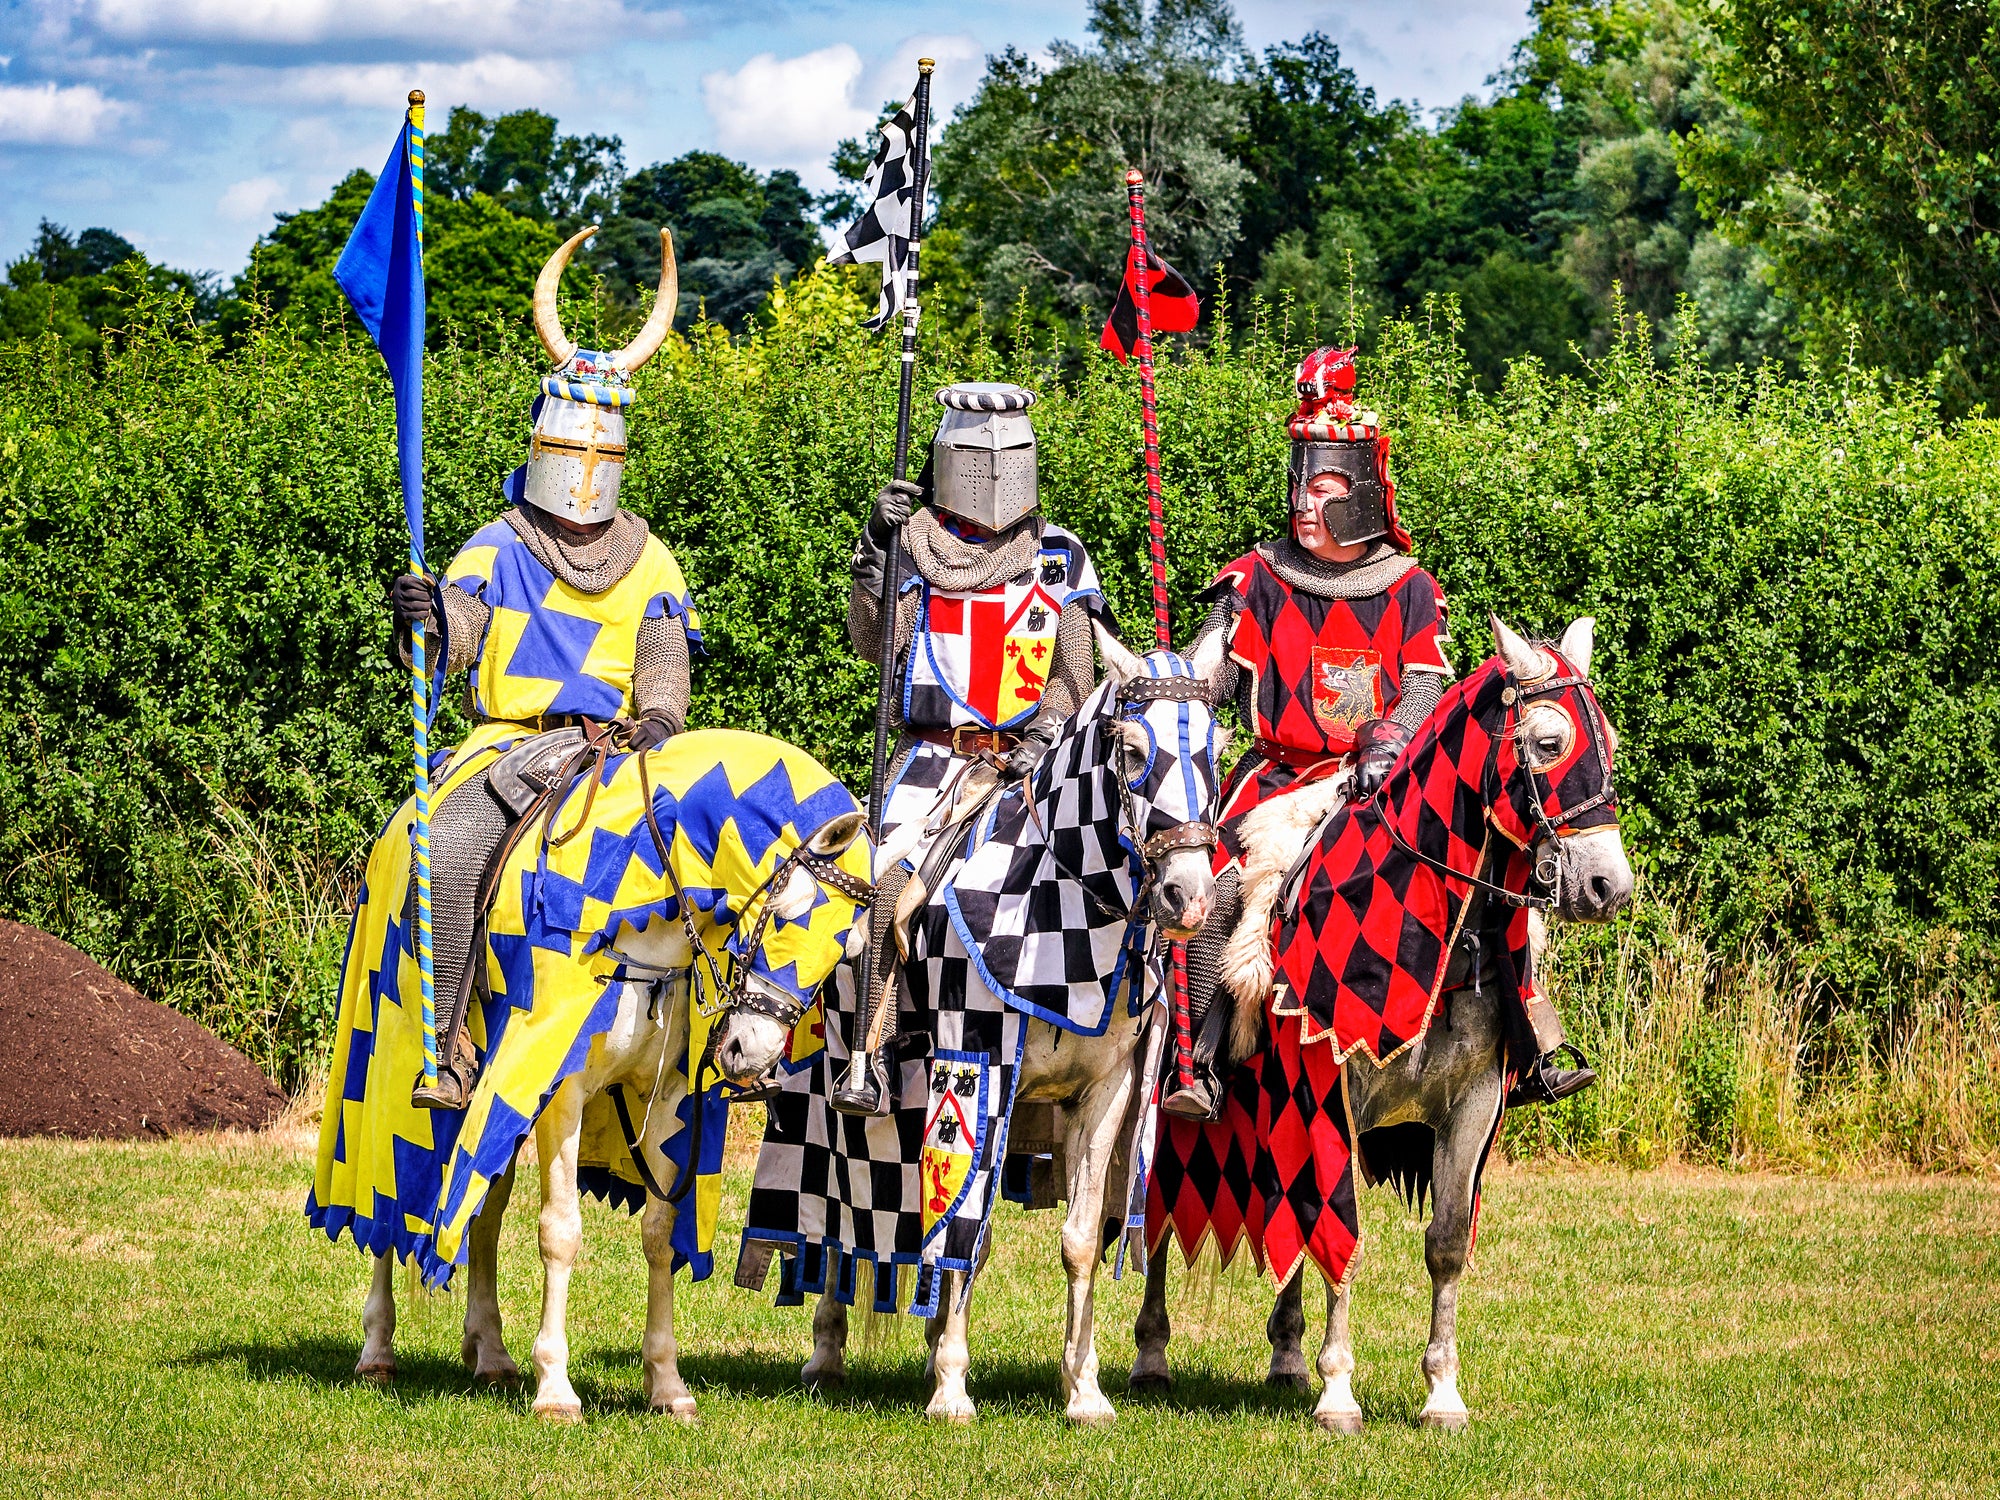 Jousting tournaments at Hever Castle offer fun for all the family